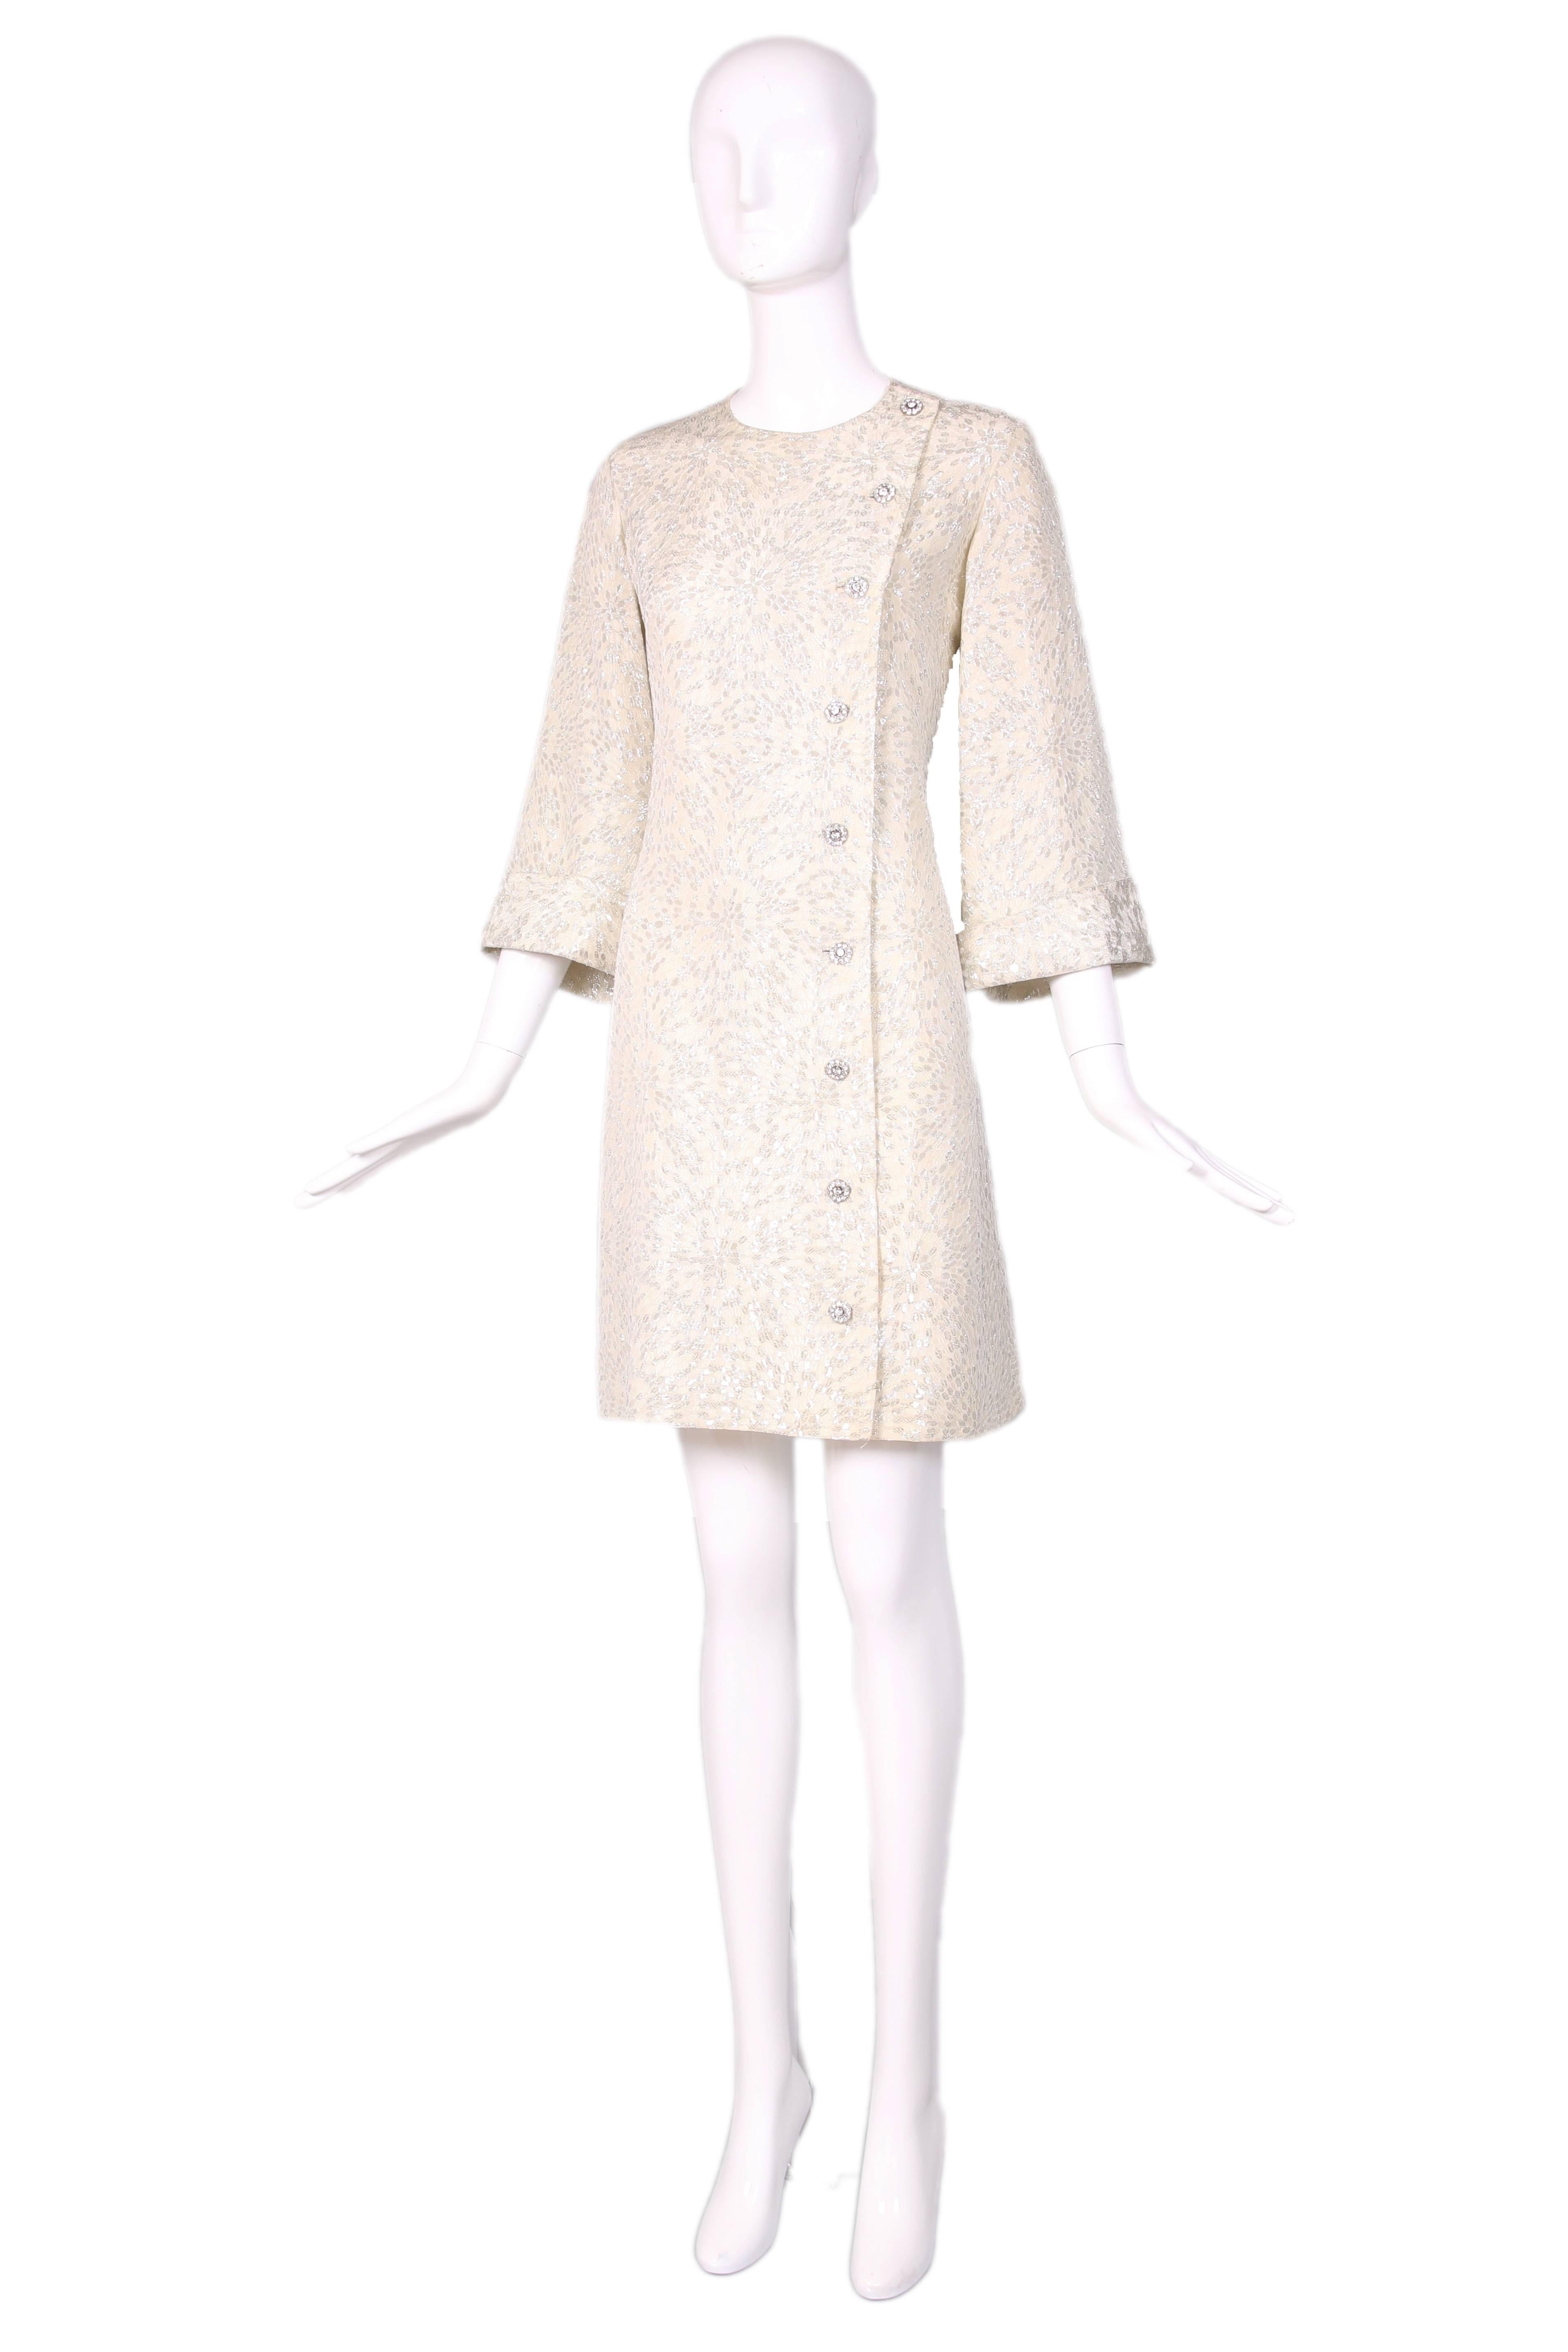 Circa 1968 Yves Saint Laurent silver lurex brocade coat dress with a slight swing silhouette, cuffed bell sleeves and rhinestone embellished buttons. Fully lined at the interior. Size tag 38. Please consult measurements. In excellent condition.